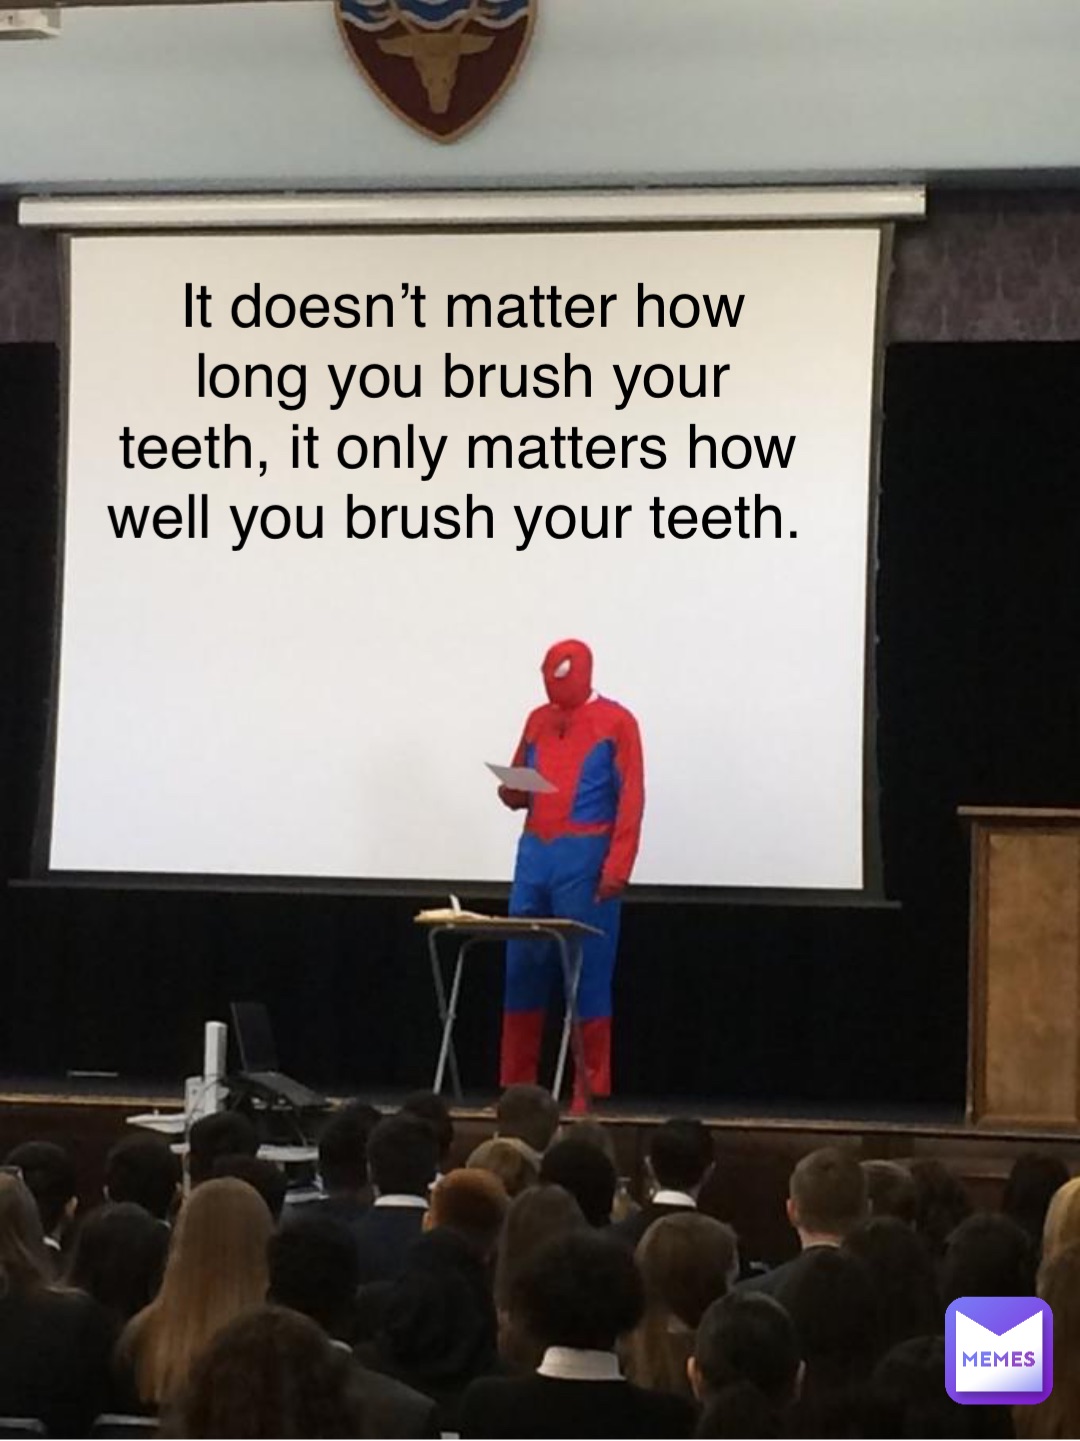 It doesn’t matter how long you brush your teeth, it only matters how well you brush your teeth.